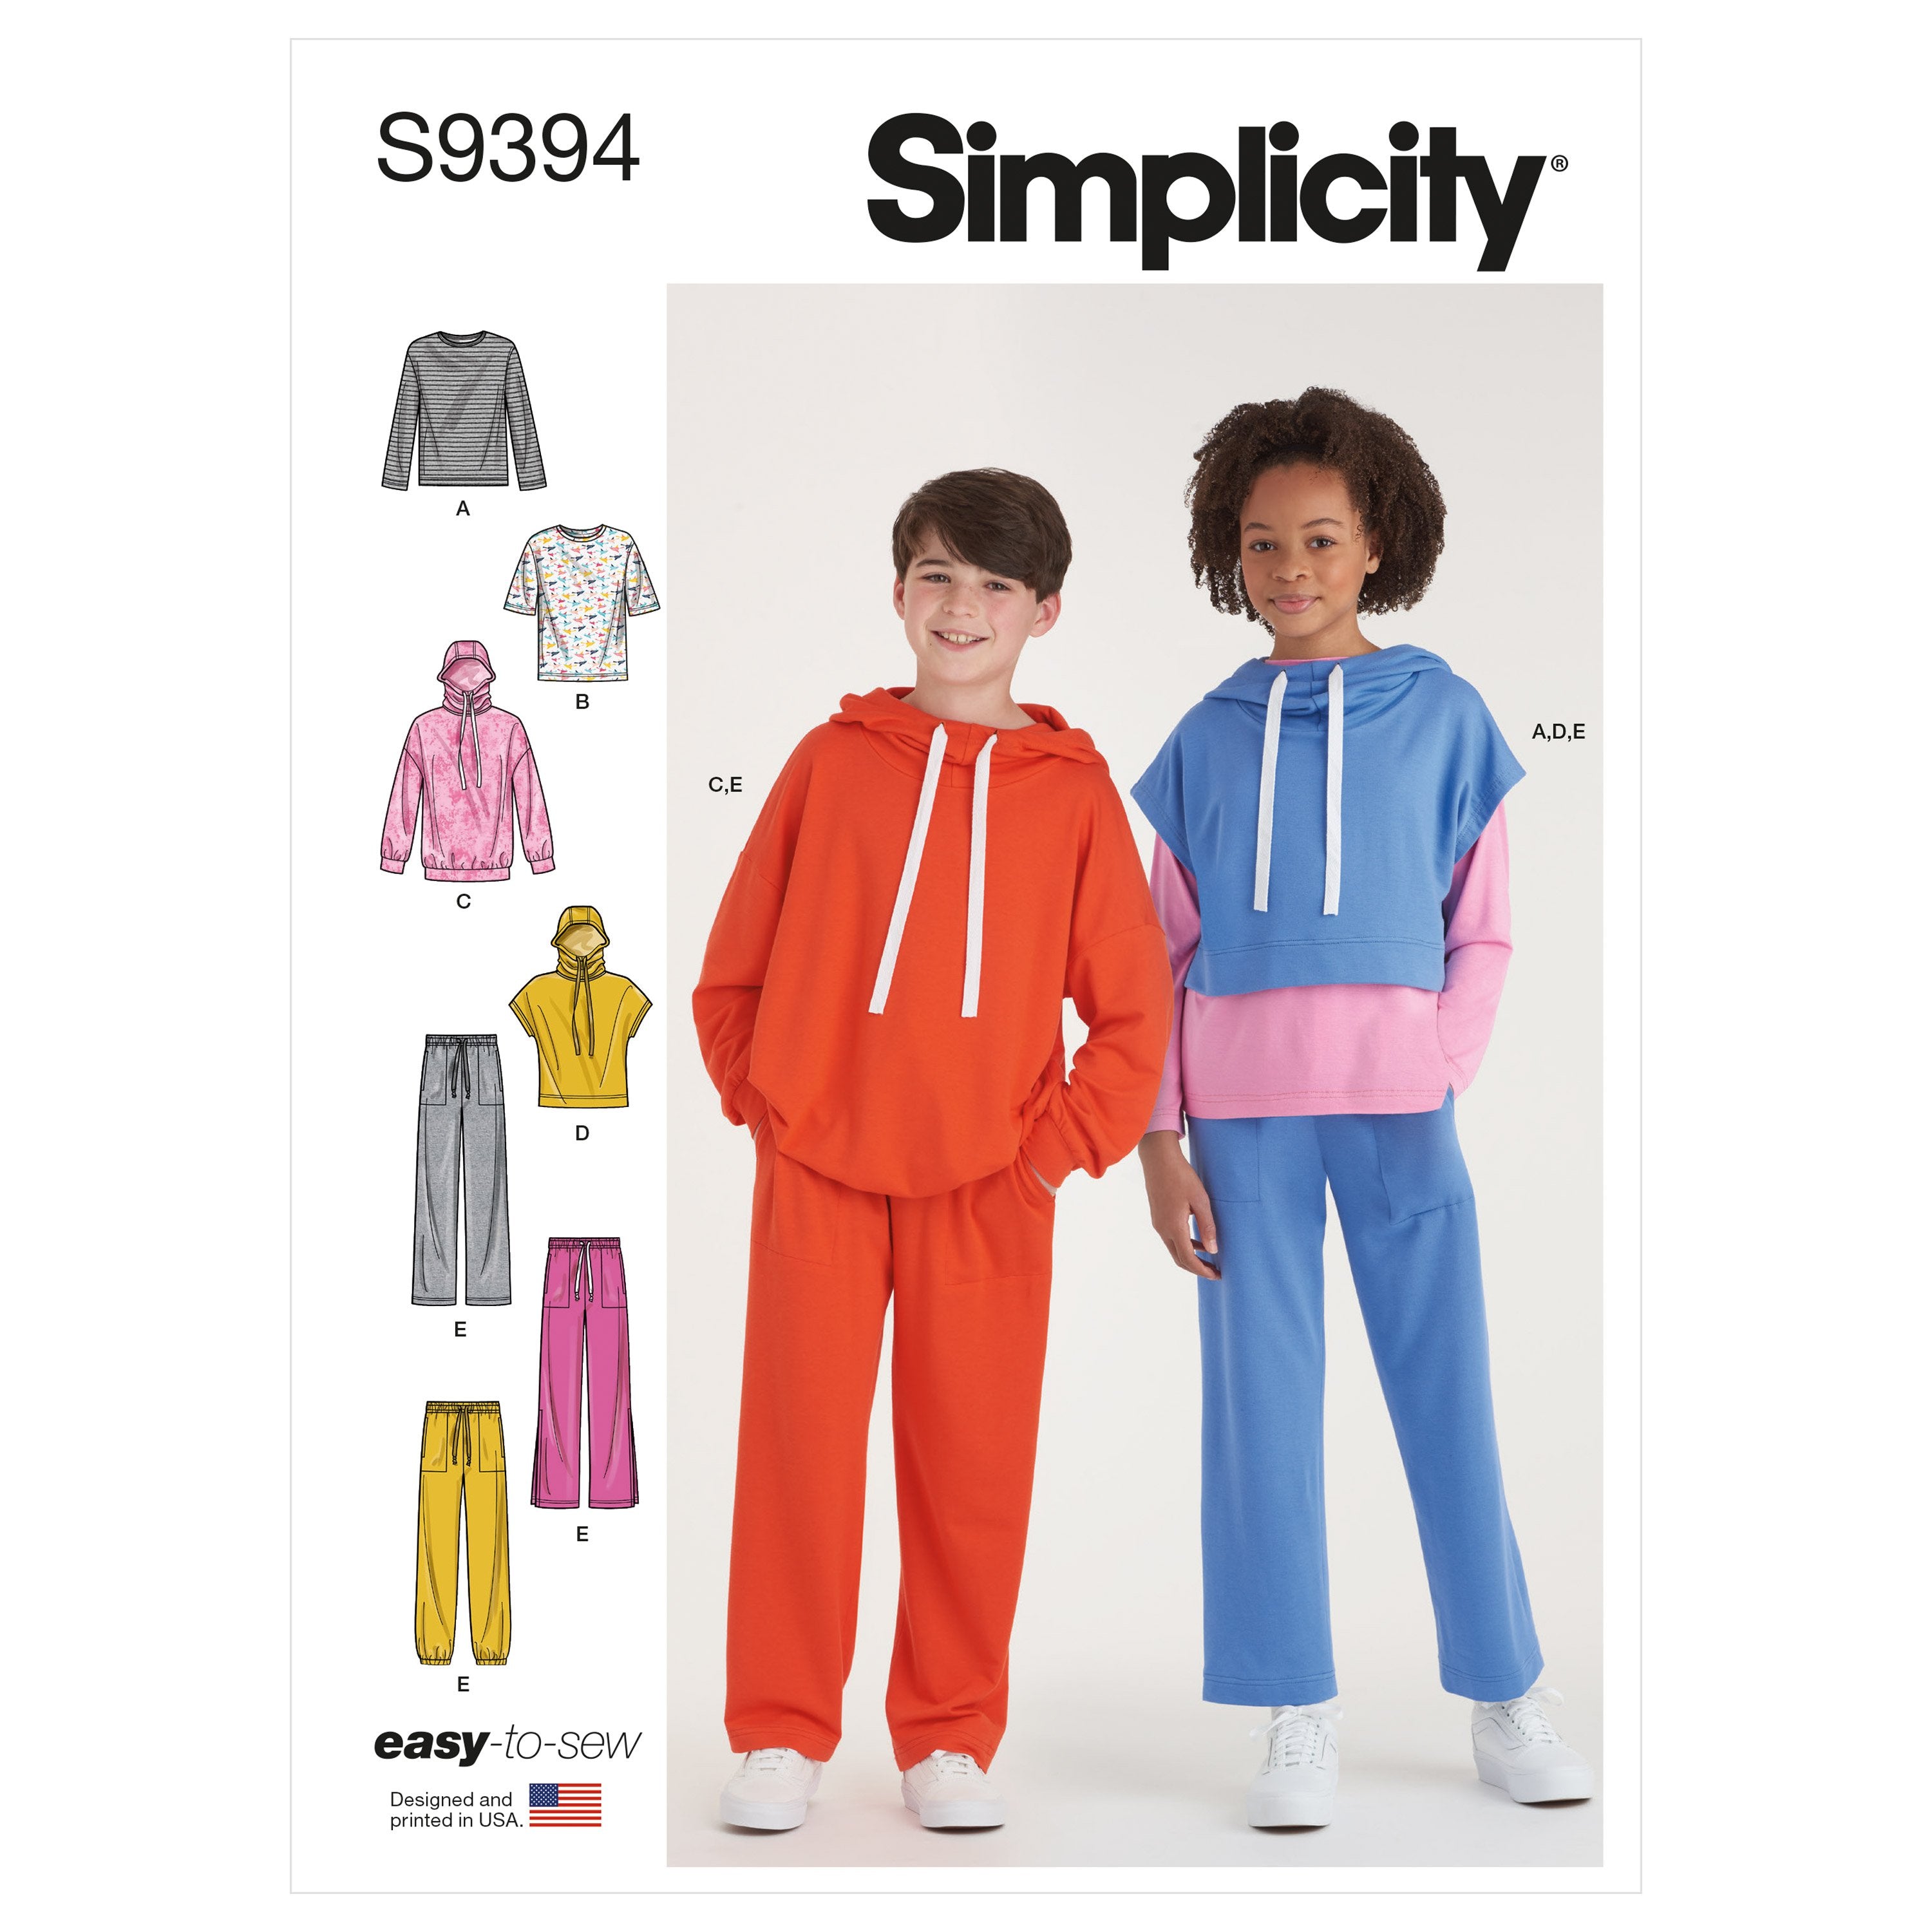 Simplicity Sewing Pattern 9394 Boys' and Girls' Oversized Knit Hoodies, Pants and Tops from Jaycotts Sewing Supplies